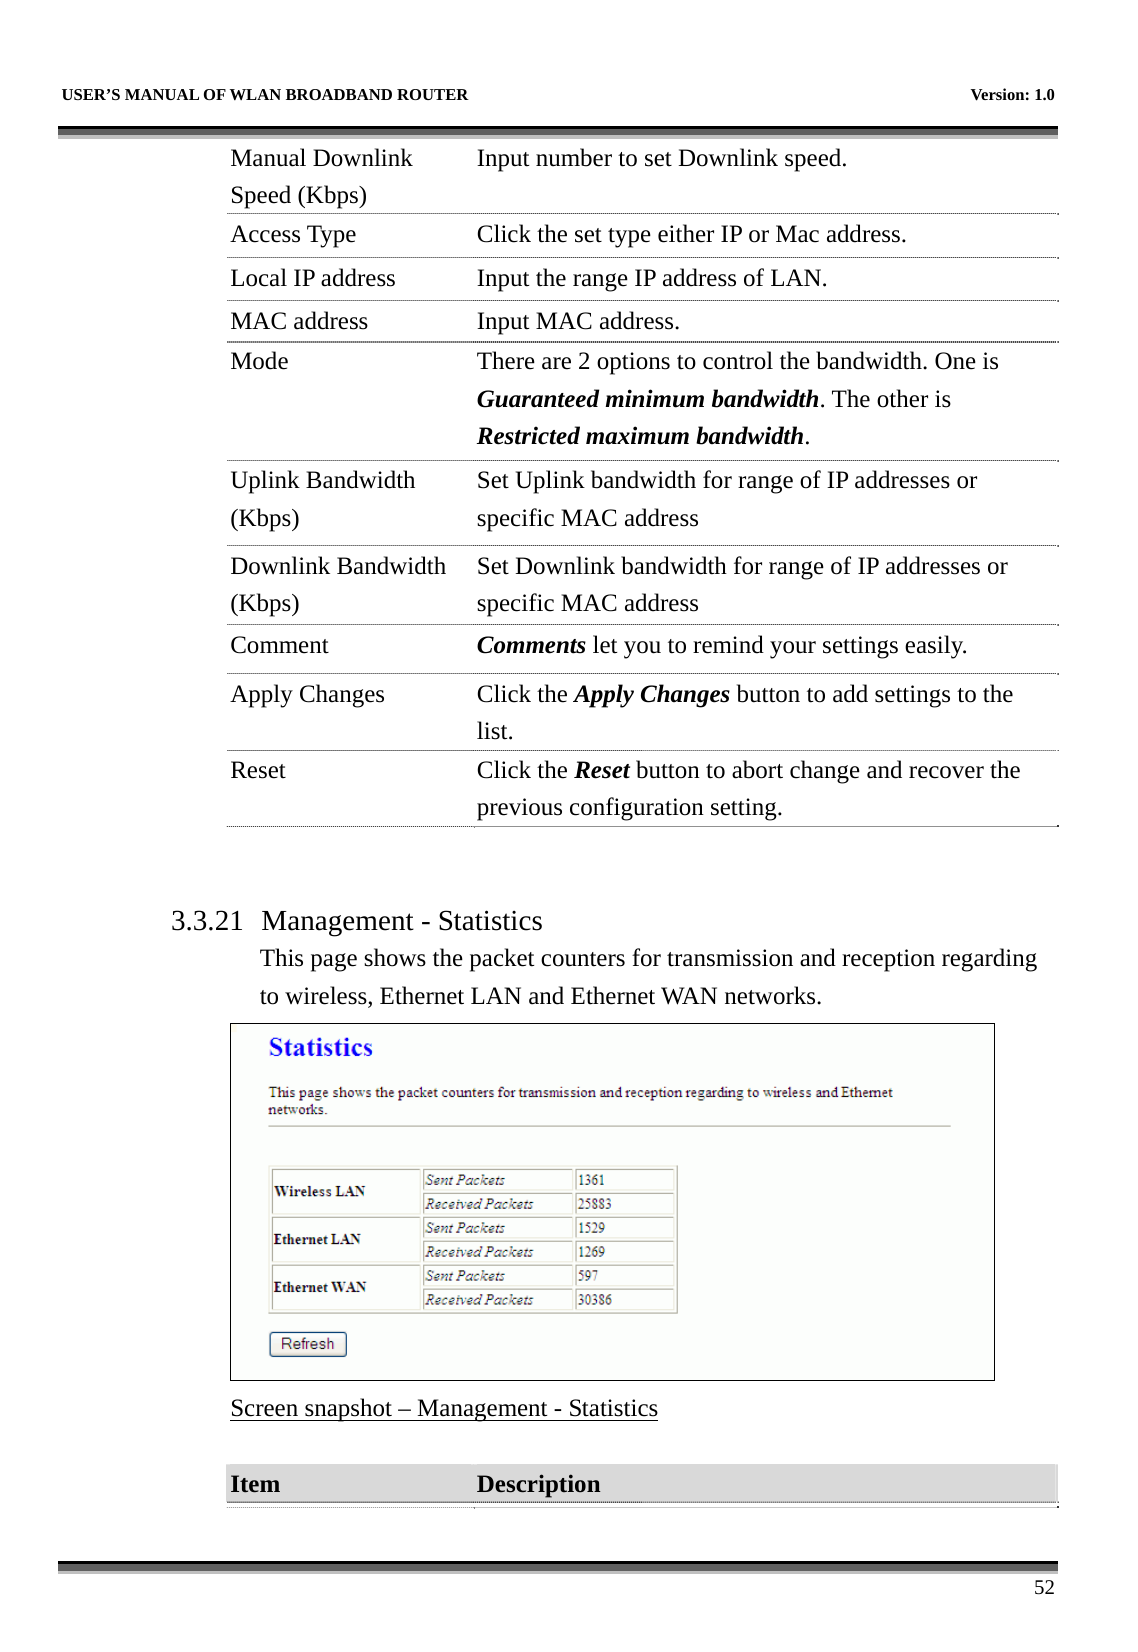   USER’S MANUAL OF WLAN BROADBAND ROUTER    Version: 1.0      52 Manual Downlink Speed (Kbps) Input number to set Downlink speed. Access Type  Click the set type either IP or Mac address. Local IP address  Input the range IP address of LAN. MAC address  Input MAC address. Mode  There are 2 options to control the bandwidth. One is Guaranteed minimum bandwidth. The other is Restricted maximum bandwidth. Uplink Bandwidth (Kbps) Set Uplink bandwidth for range of IP addresses or specific MAC address Downlink Bandwidth (Kbps) Set Downlink bandwidth for range of IP addresses or specific MAC address Comment  Comments let you to remind your settings easily. Apply Changes  Click the Apply Changes button to add settings to the list. Reset Click the Reset button to abort change and recover the previous configuration setting.   3.3.21 Management - Statistics This page shows the packet counters for transmission and reception regarding to wireless, Ethernet LAN and Ethernet WAN networks.  Screen snapshot – Management - Statistics  Item  Description   